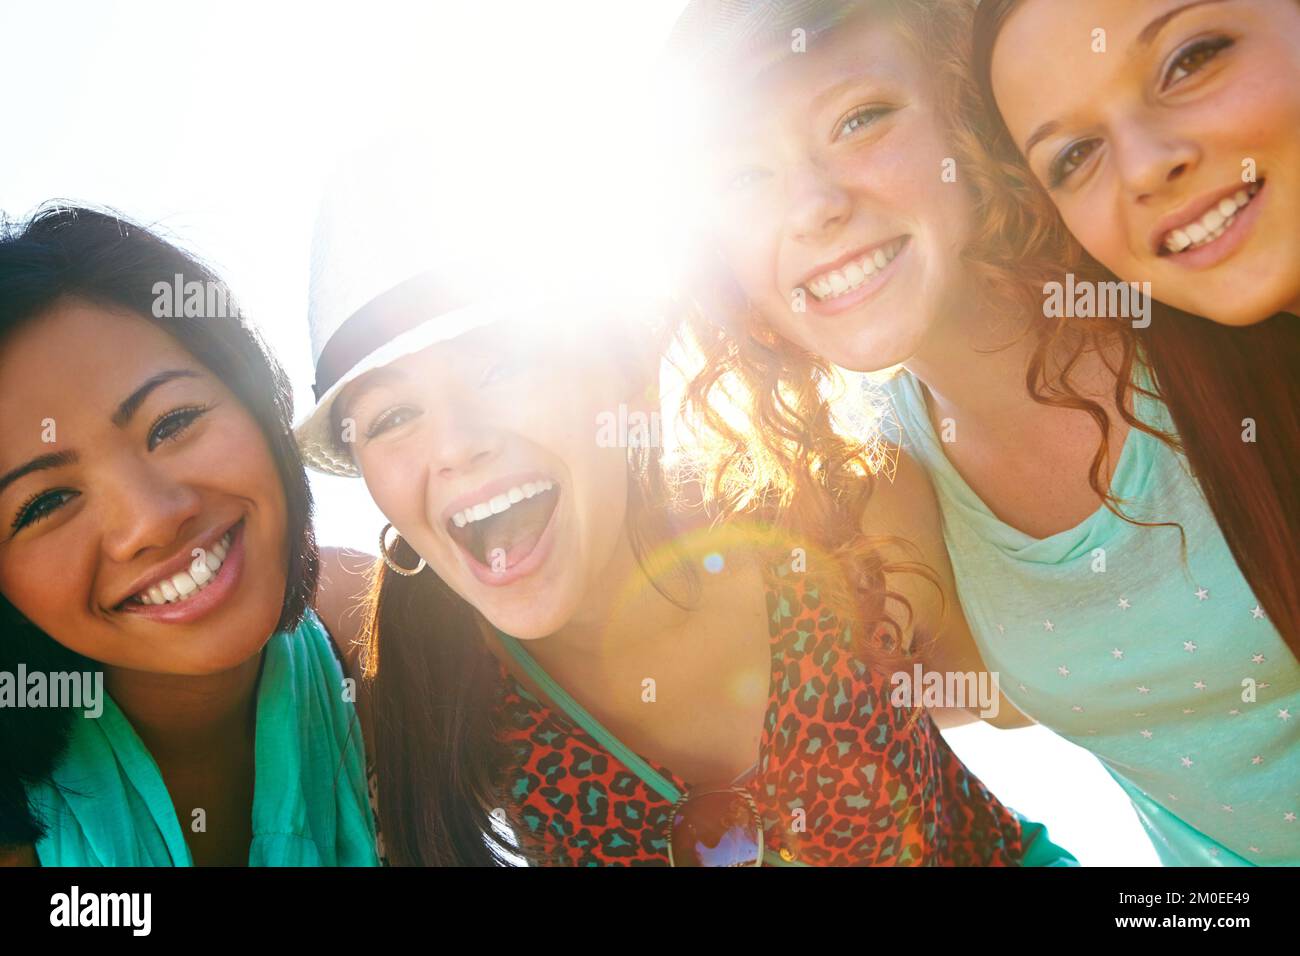 Friends, fun and summer sun. Closeup shot of a group of teenage girls smiling with their arms around each others shoulders. Stock Photo